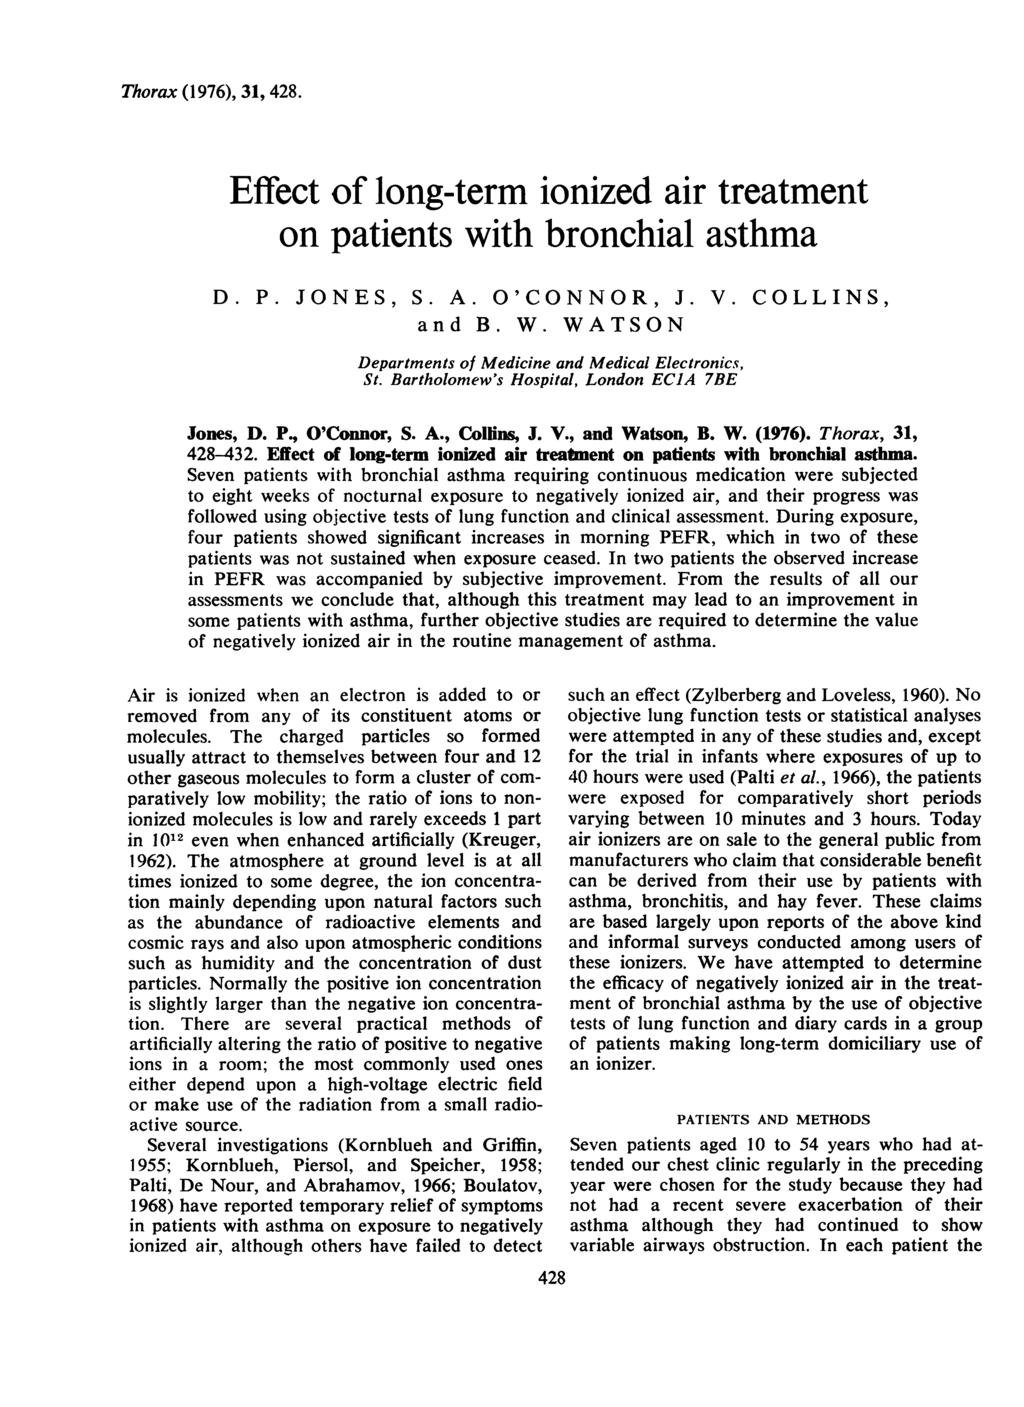 Thorax (1976), 31, 428. Effect of long-term ionized air treatment on patients with bronchial asthma D. P. JONES, S. A. O'CONNOR, J. V. COLLINS, and B. W.